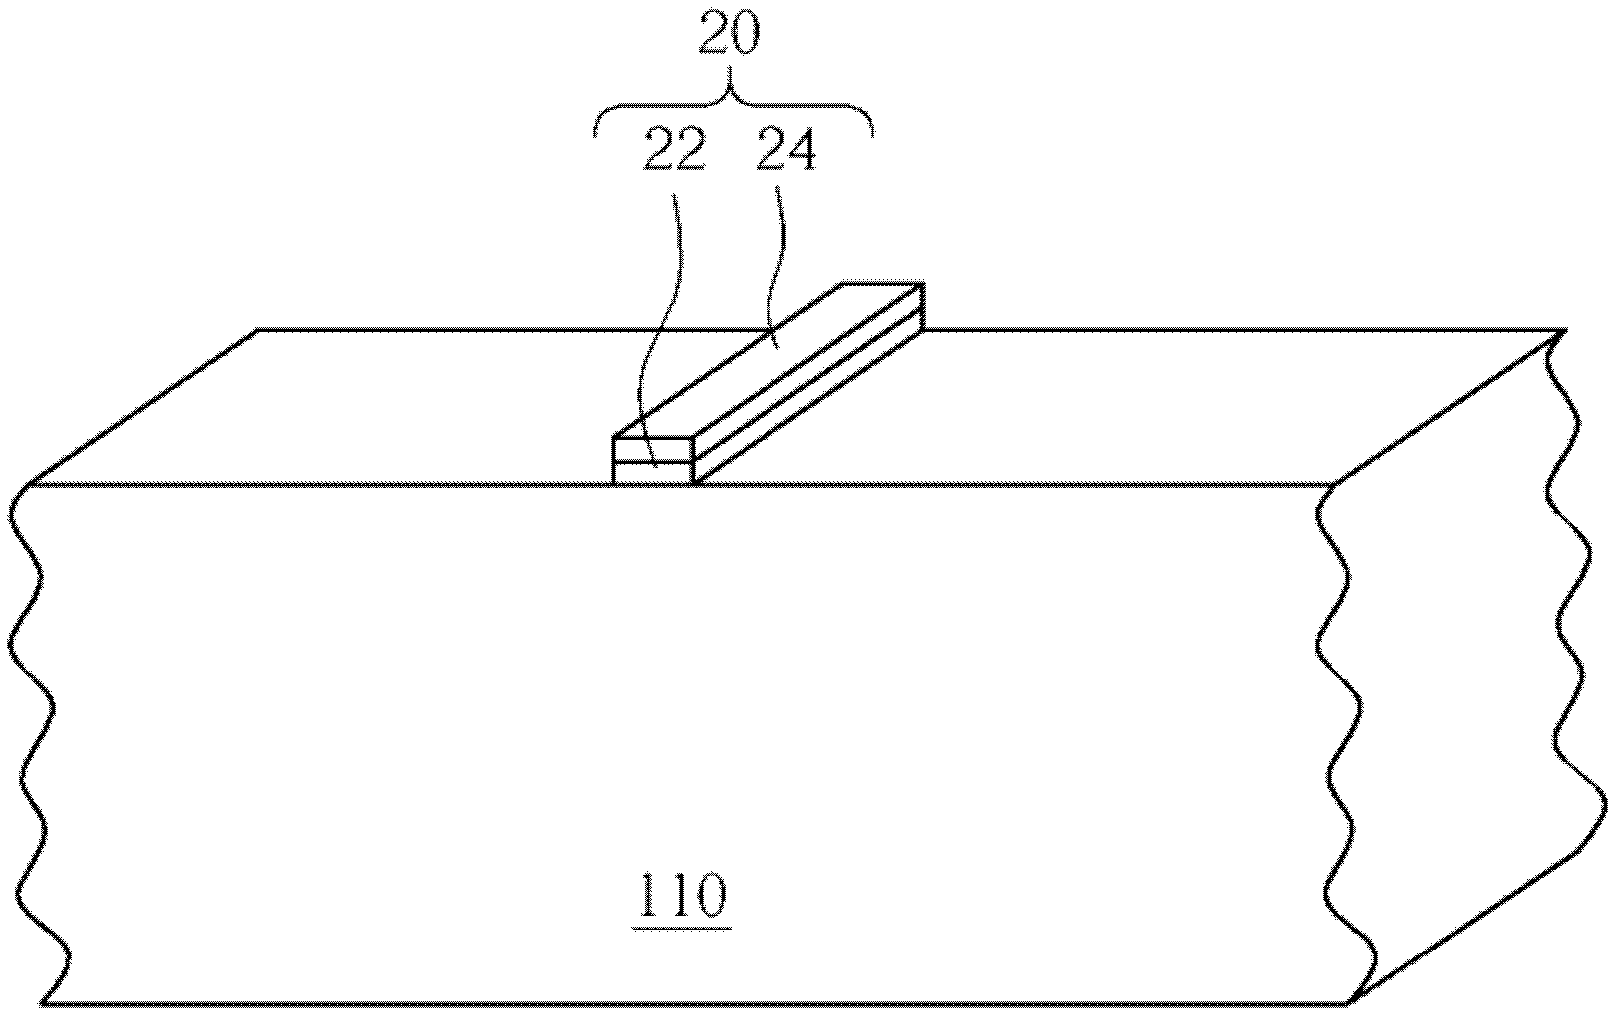 Process for producing semiconductor